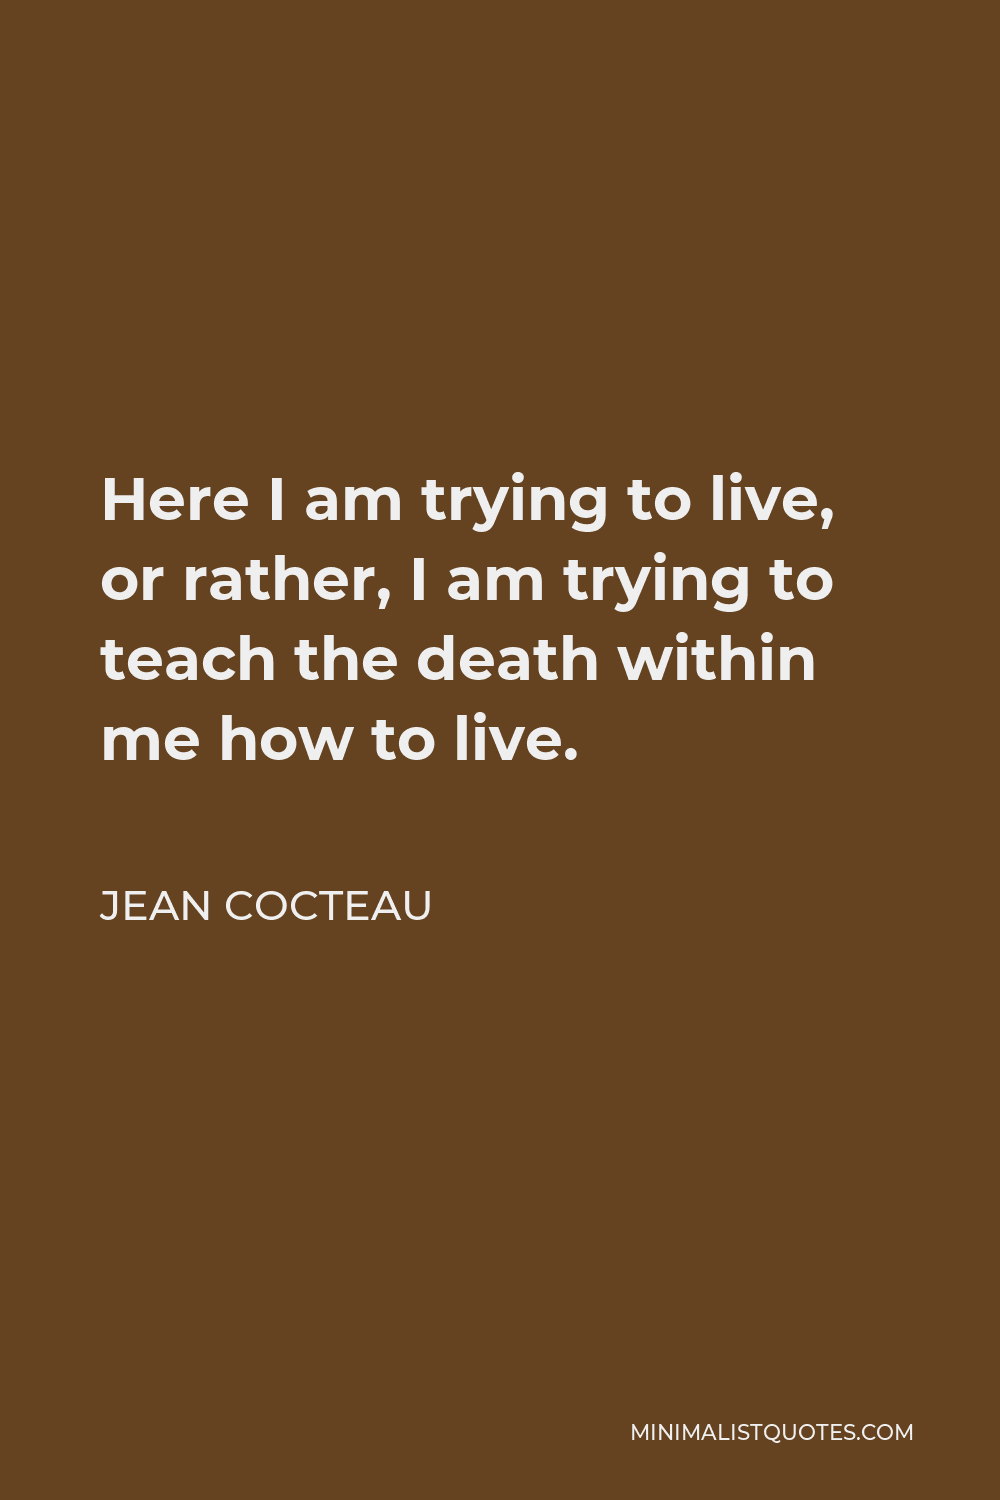 Jean Cocteau Quote - Here I am trying to live, or rather, I am trying to teach the death within me how to live.